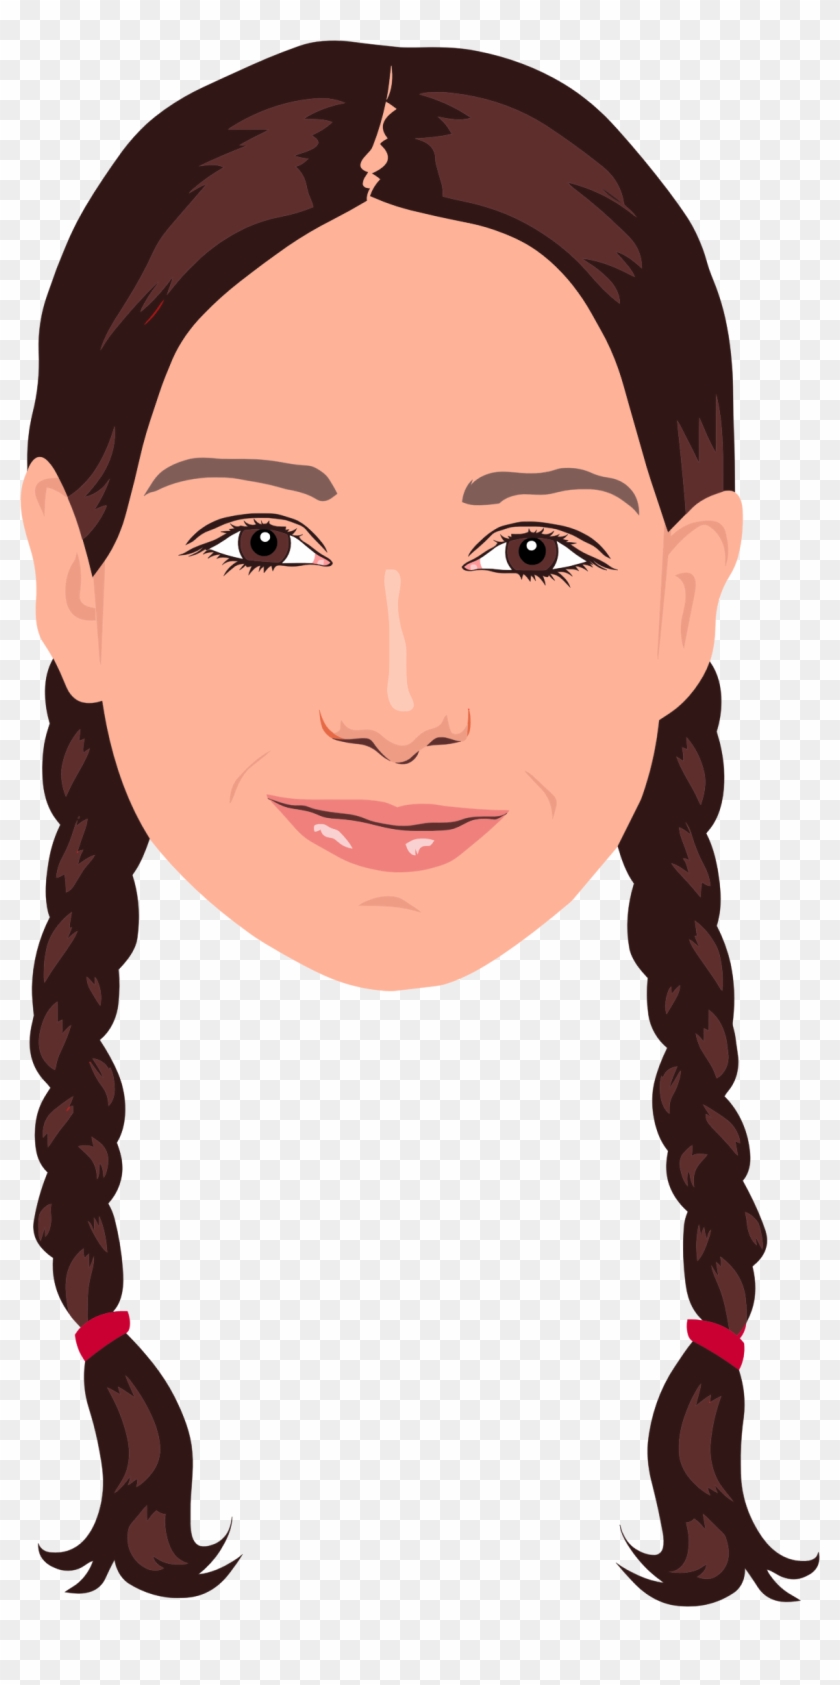 This Free Icons Png Design Of Braided Hair Girl Portrait Clipart #1497761